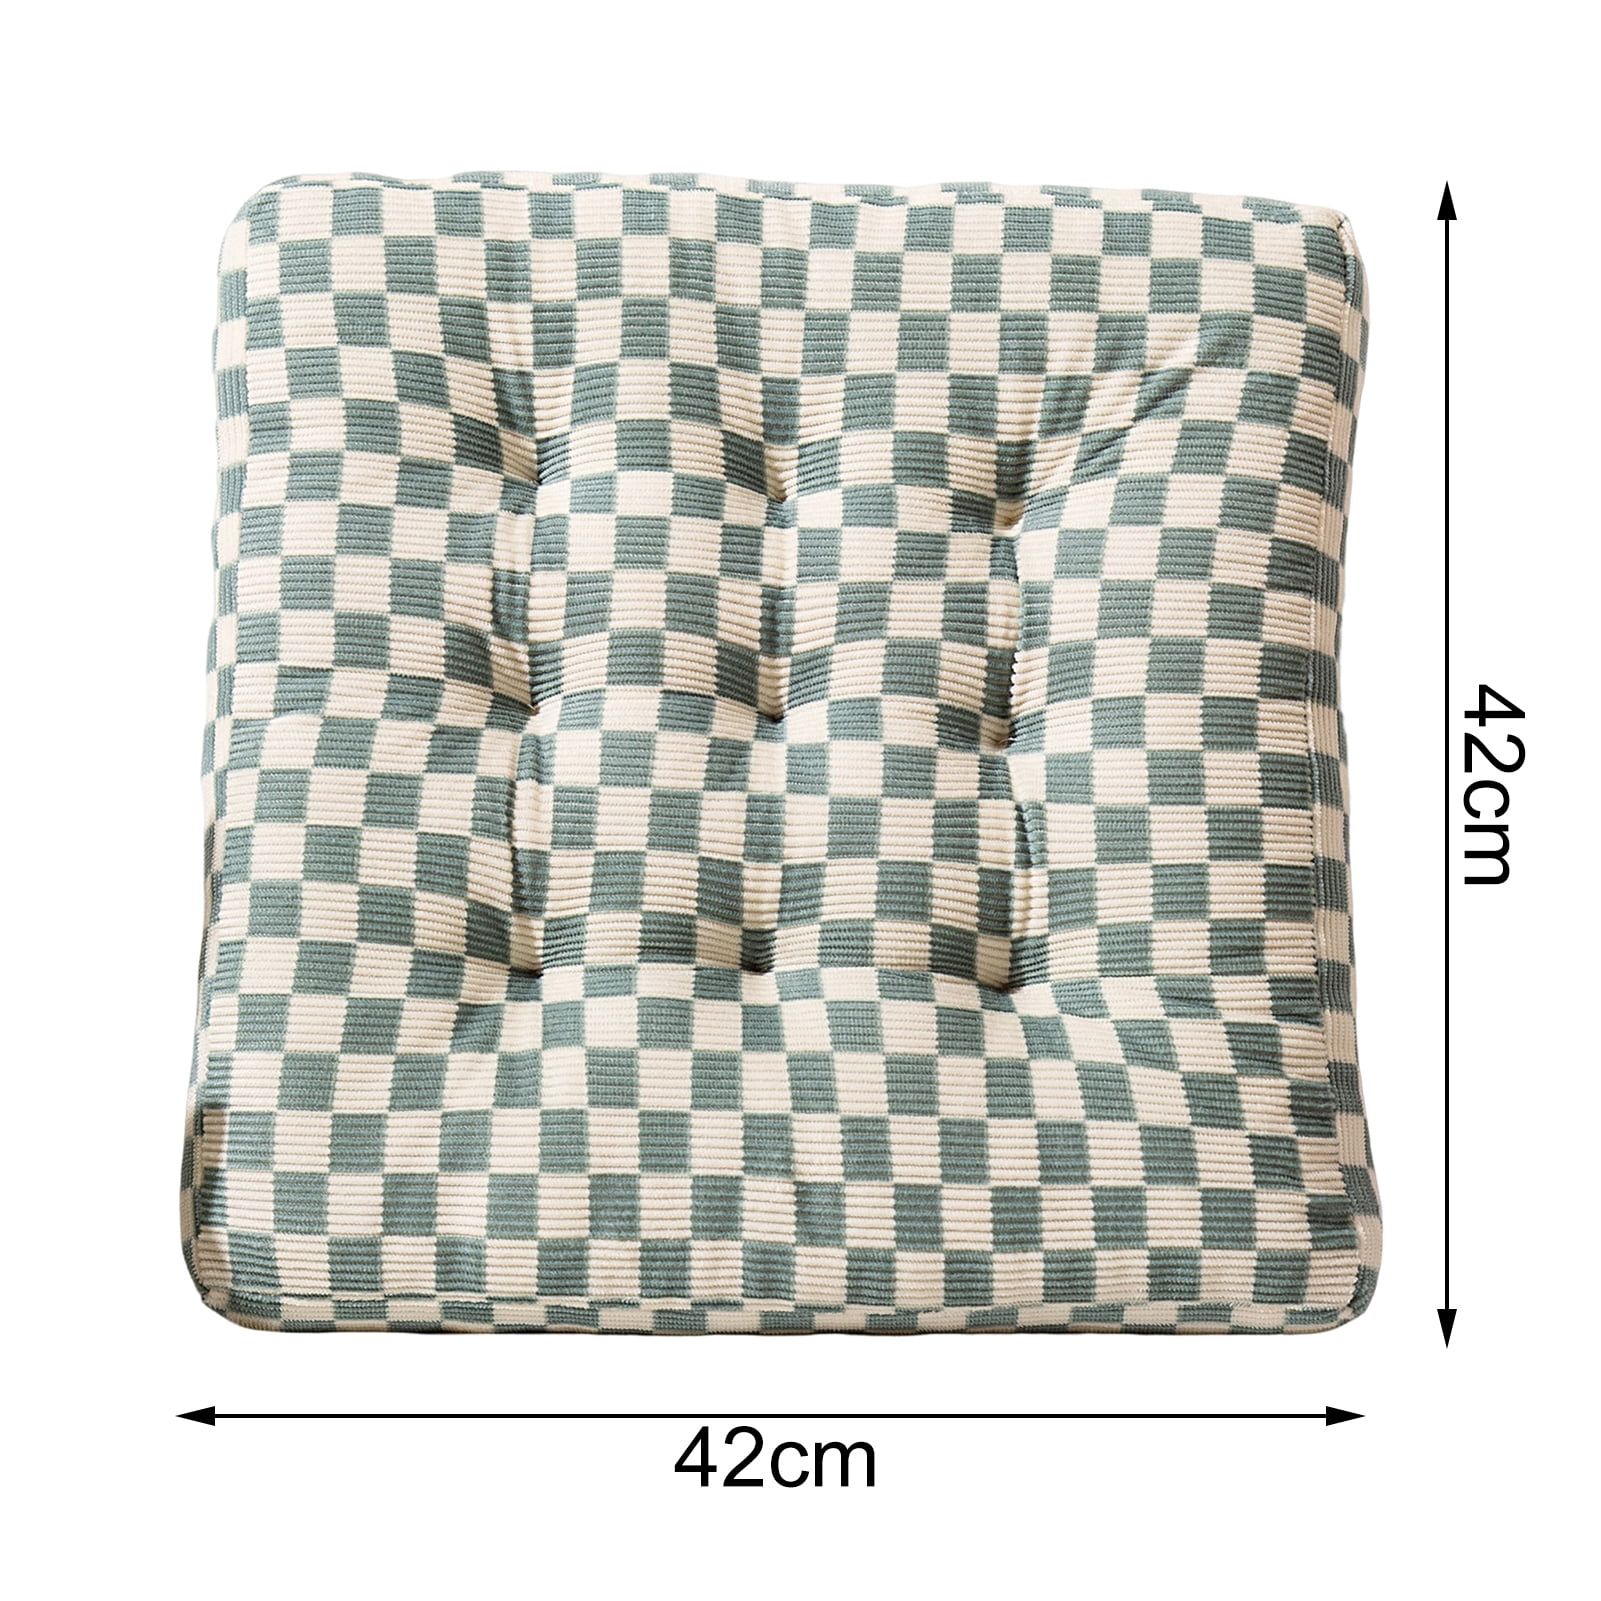  SXFYHXY Heated Chair Cushion Cushion Lazy Sofa Office Chair  Cushion Warm Floor Cute Seat Pad for Dining Room Bedroom Comfort Chair for  Health : Home & Kitchen